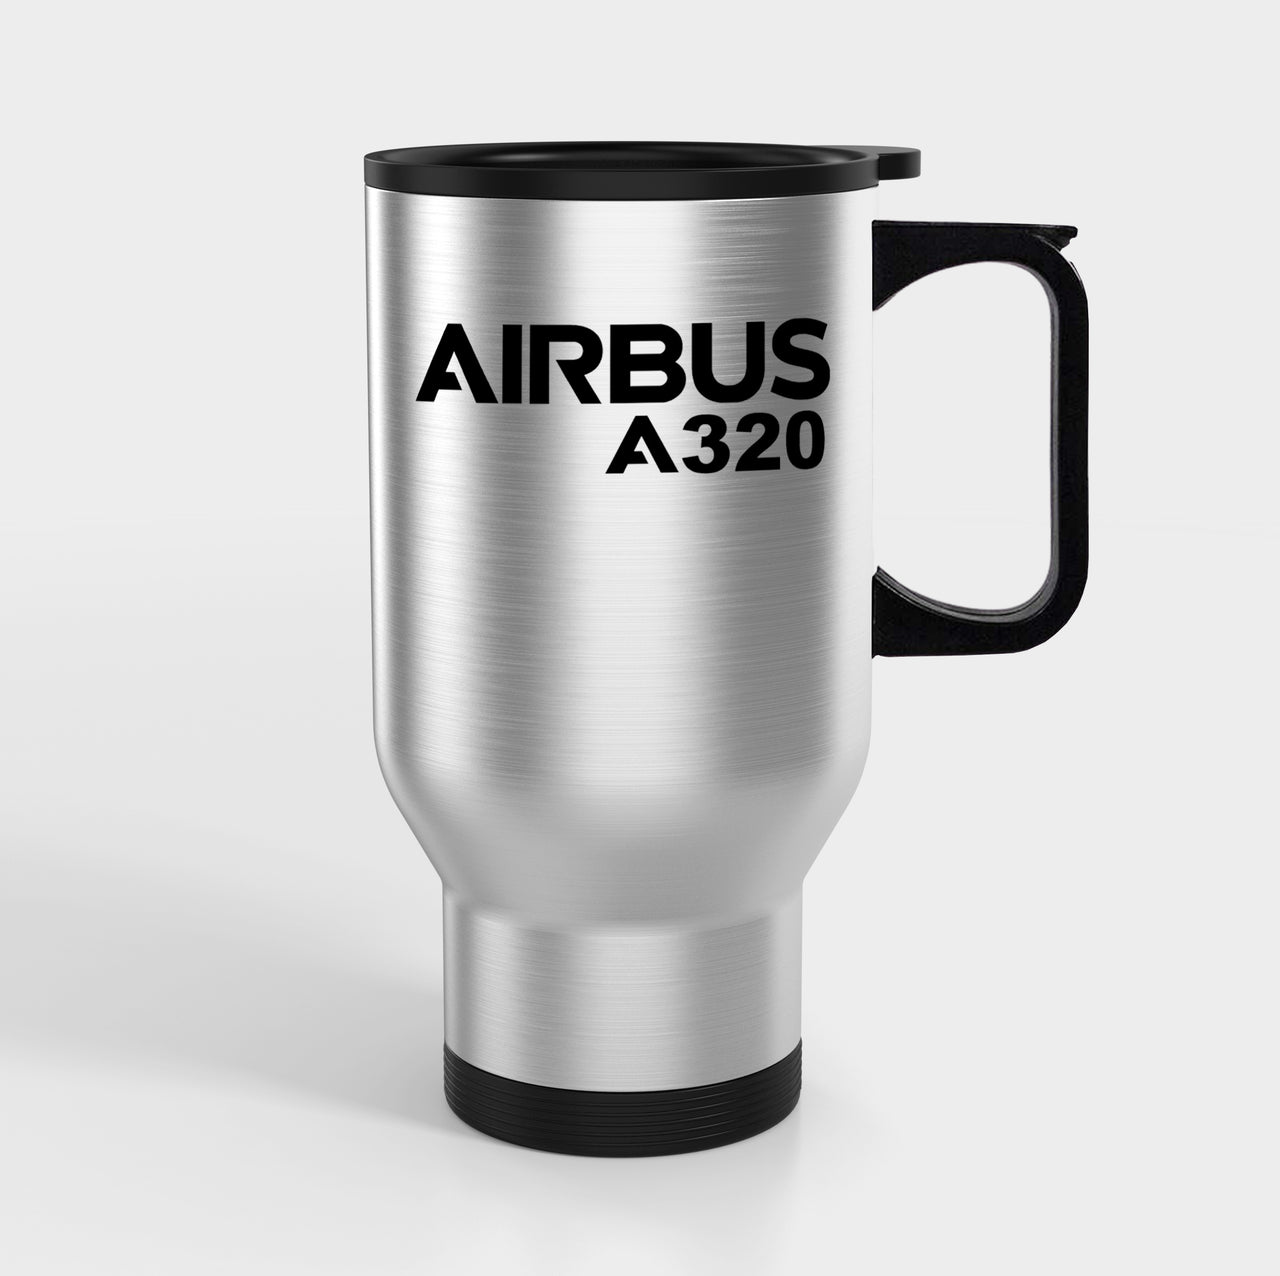 Airbus A320 & Text Designed Travel Mugs (With Holder)